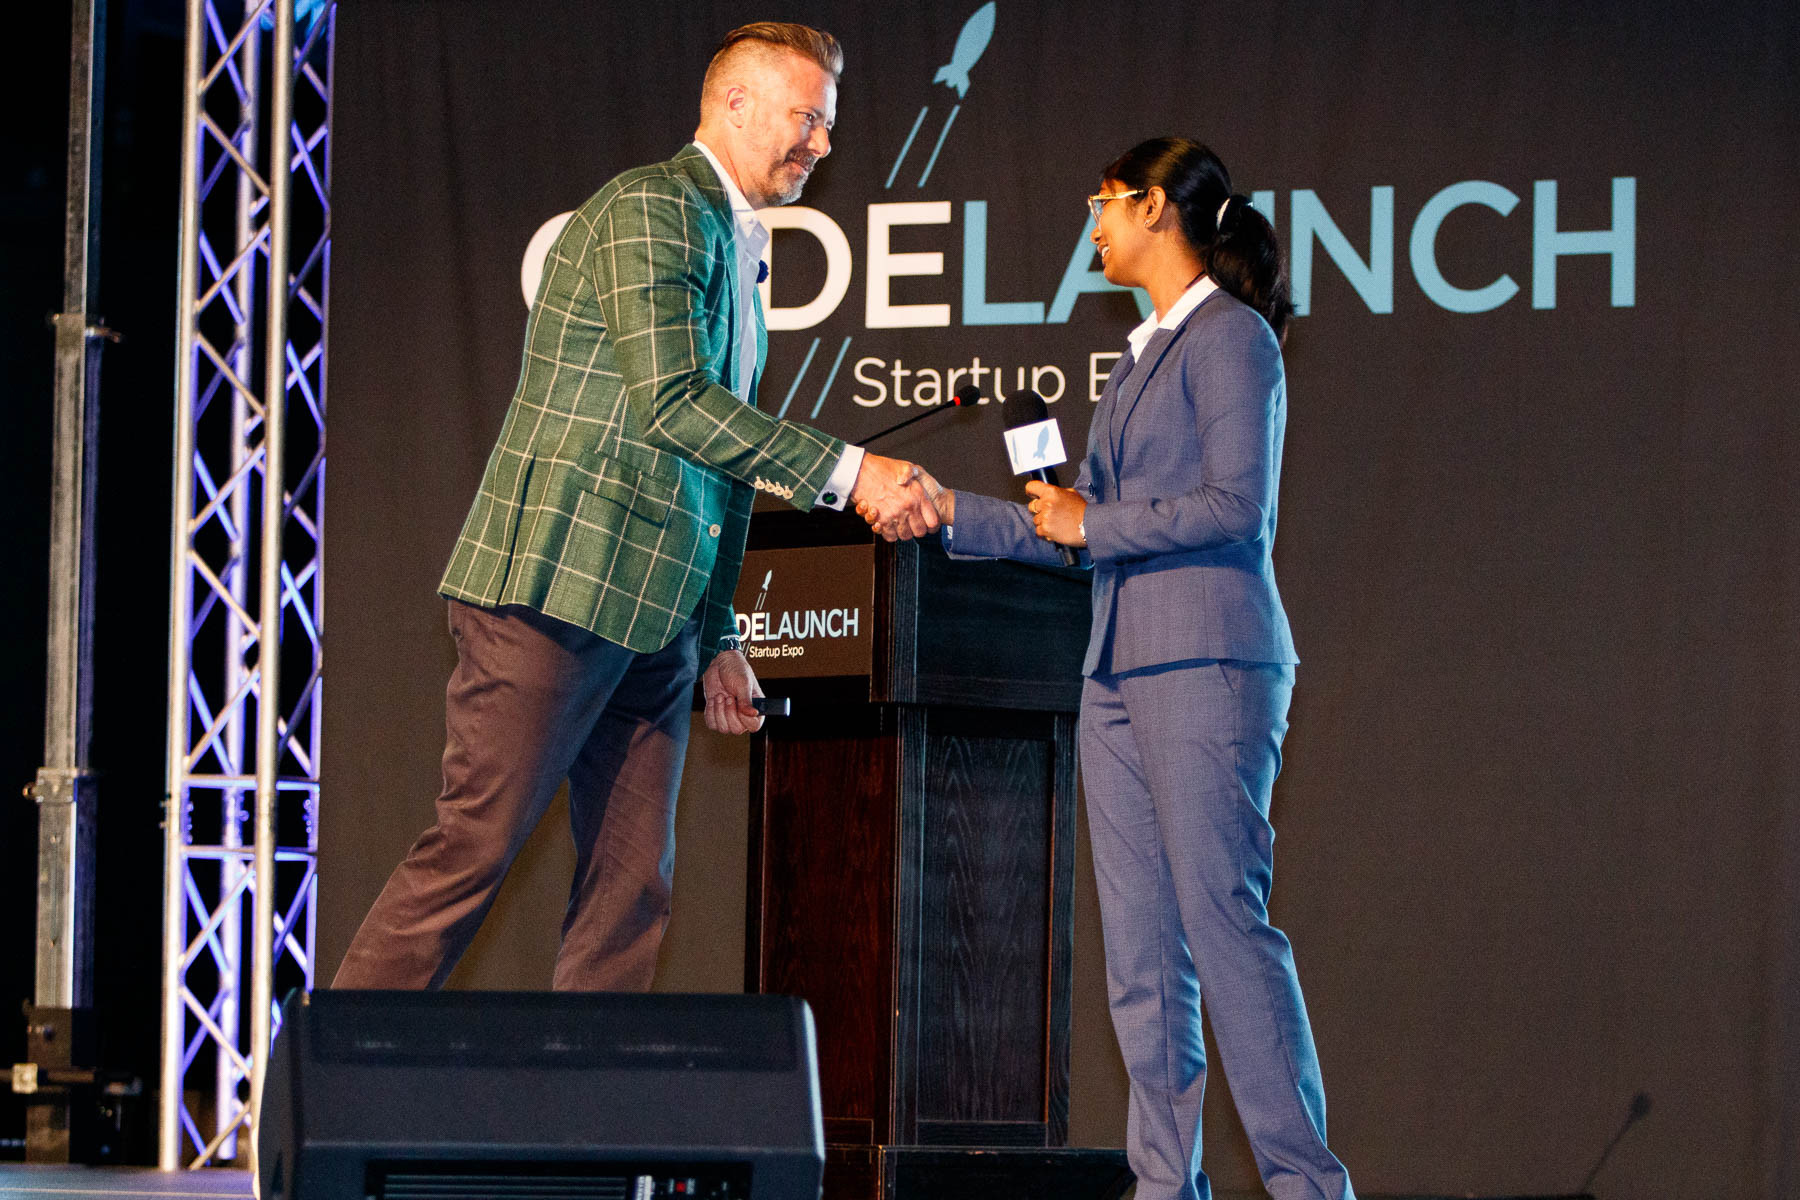 A woman is congratulated on stage for an award at Code Launch.